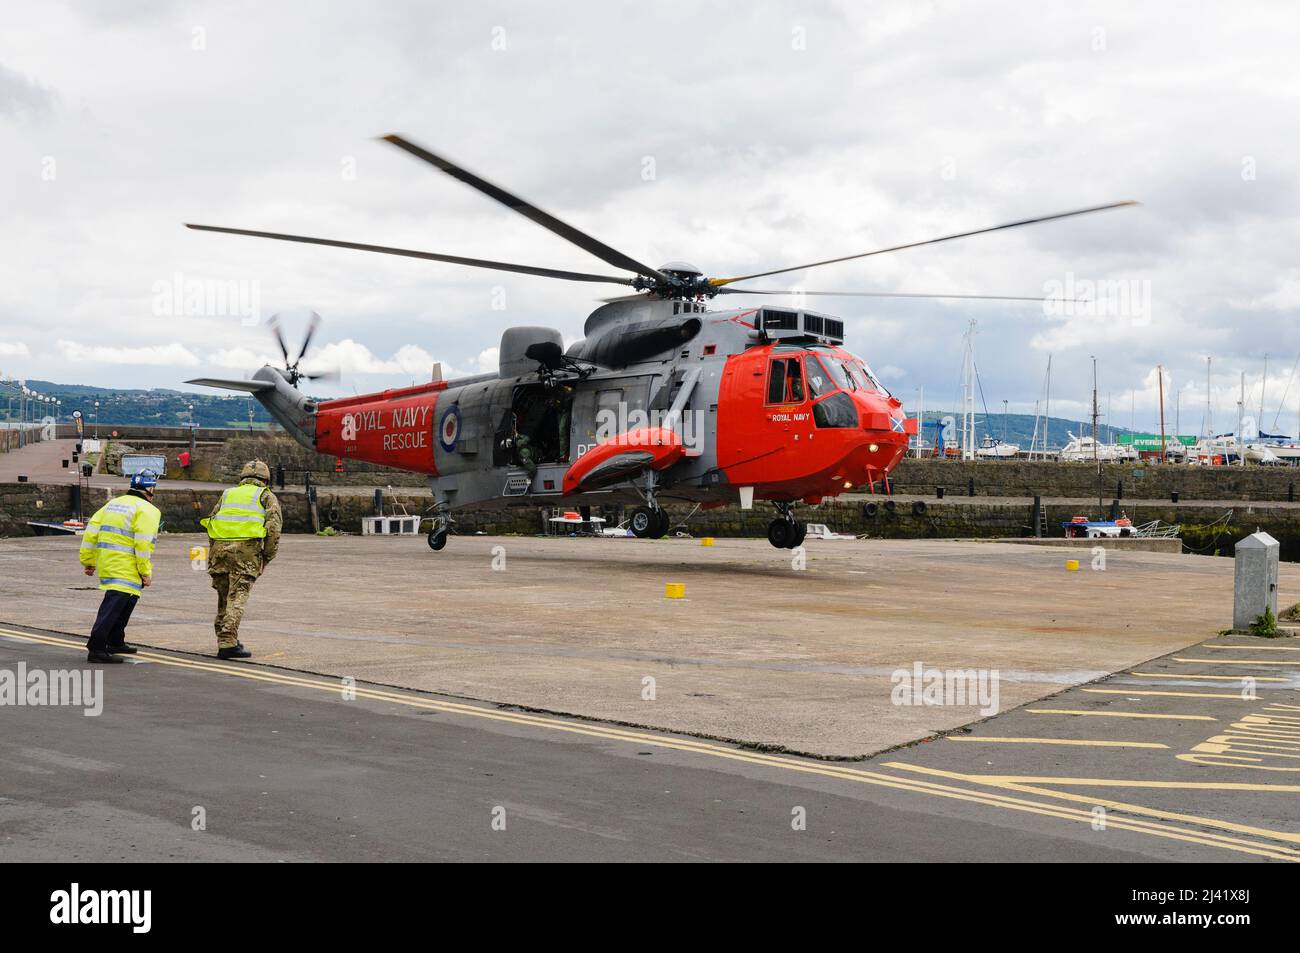 Carrickfergus, Northern Ireland.  30th June 2012.  Royal Navy Sea King helicopter about to land Stock Photo